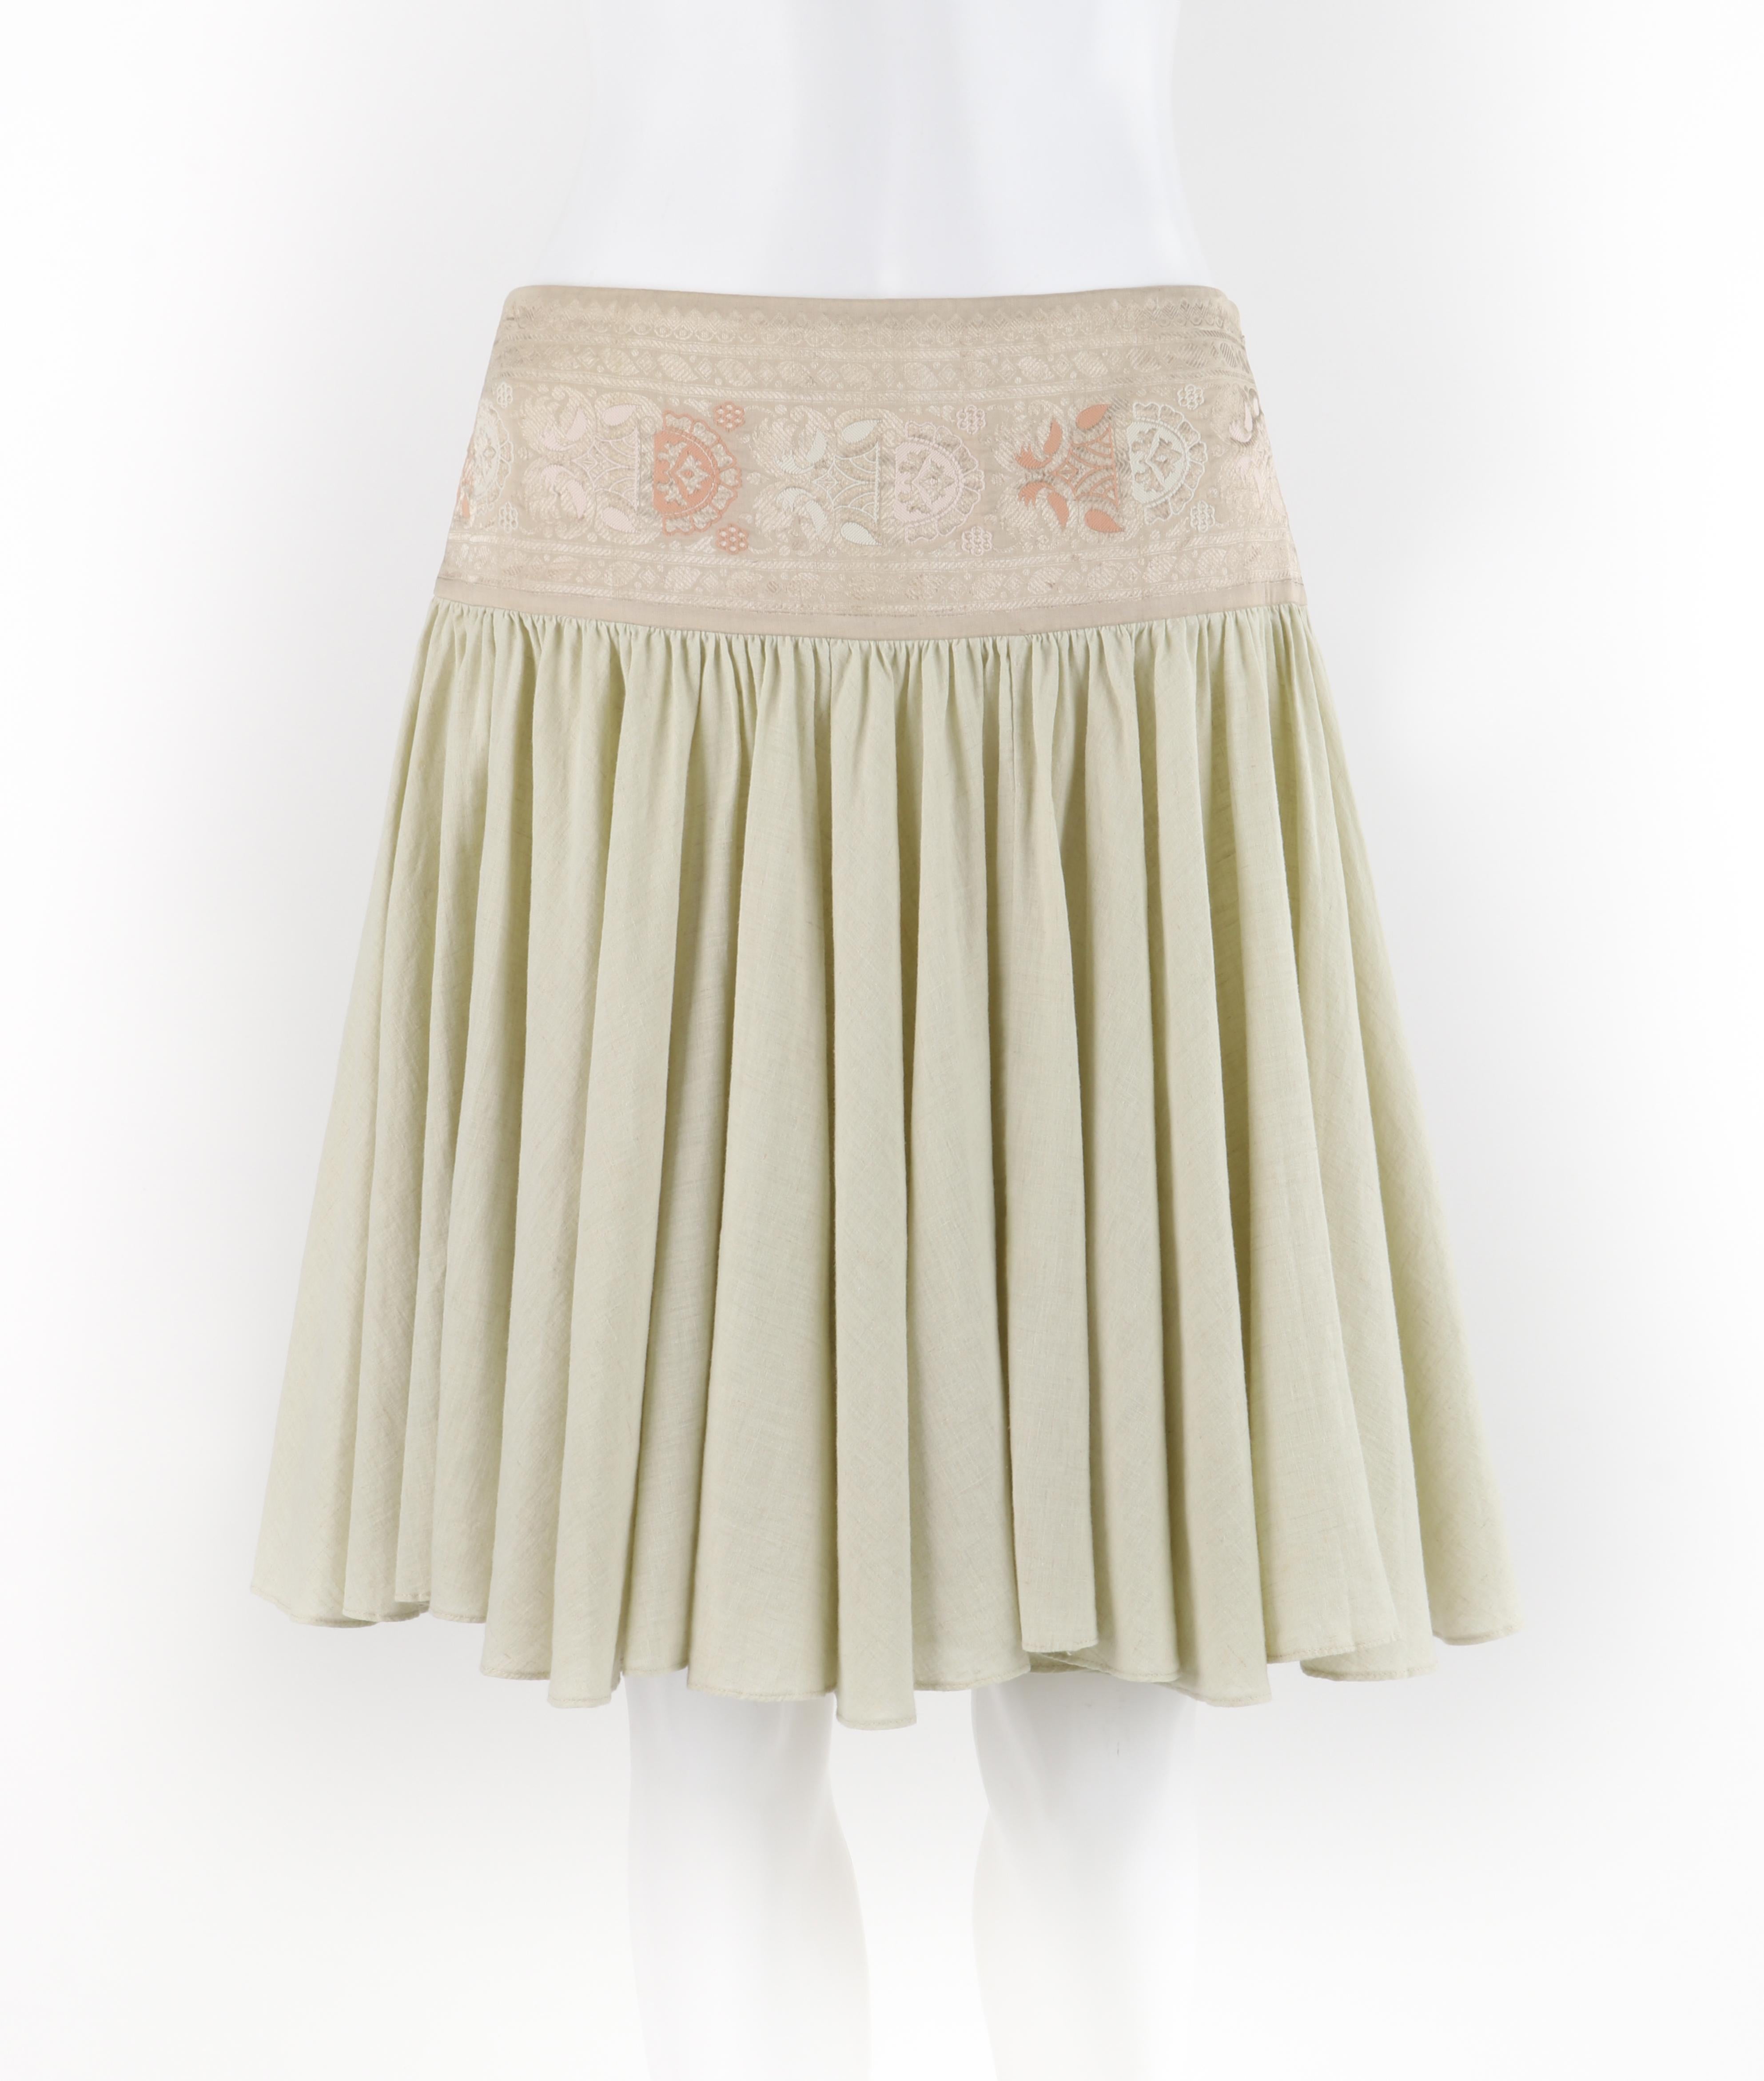 Brand / Manufacturer: Alexander McQueen
Collection: S/S 2005
Designer: Alexander McQueen 
Style: Circle Skirt
Color(s): Shades of beige, pink, white, tan
Lined: No
Marked Fabric Content: 